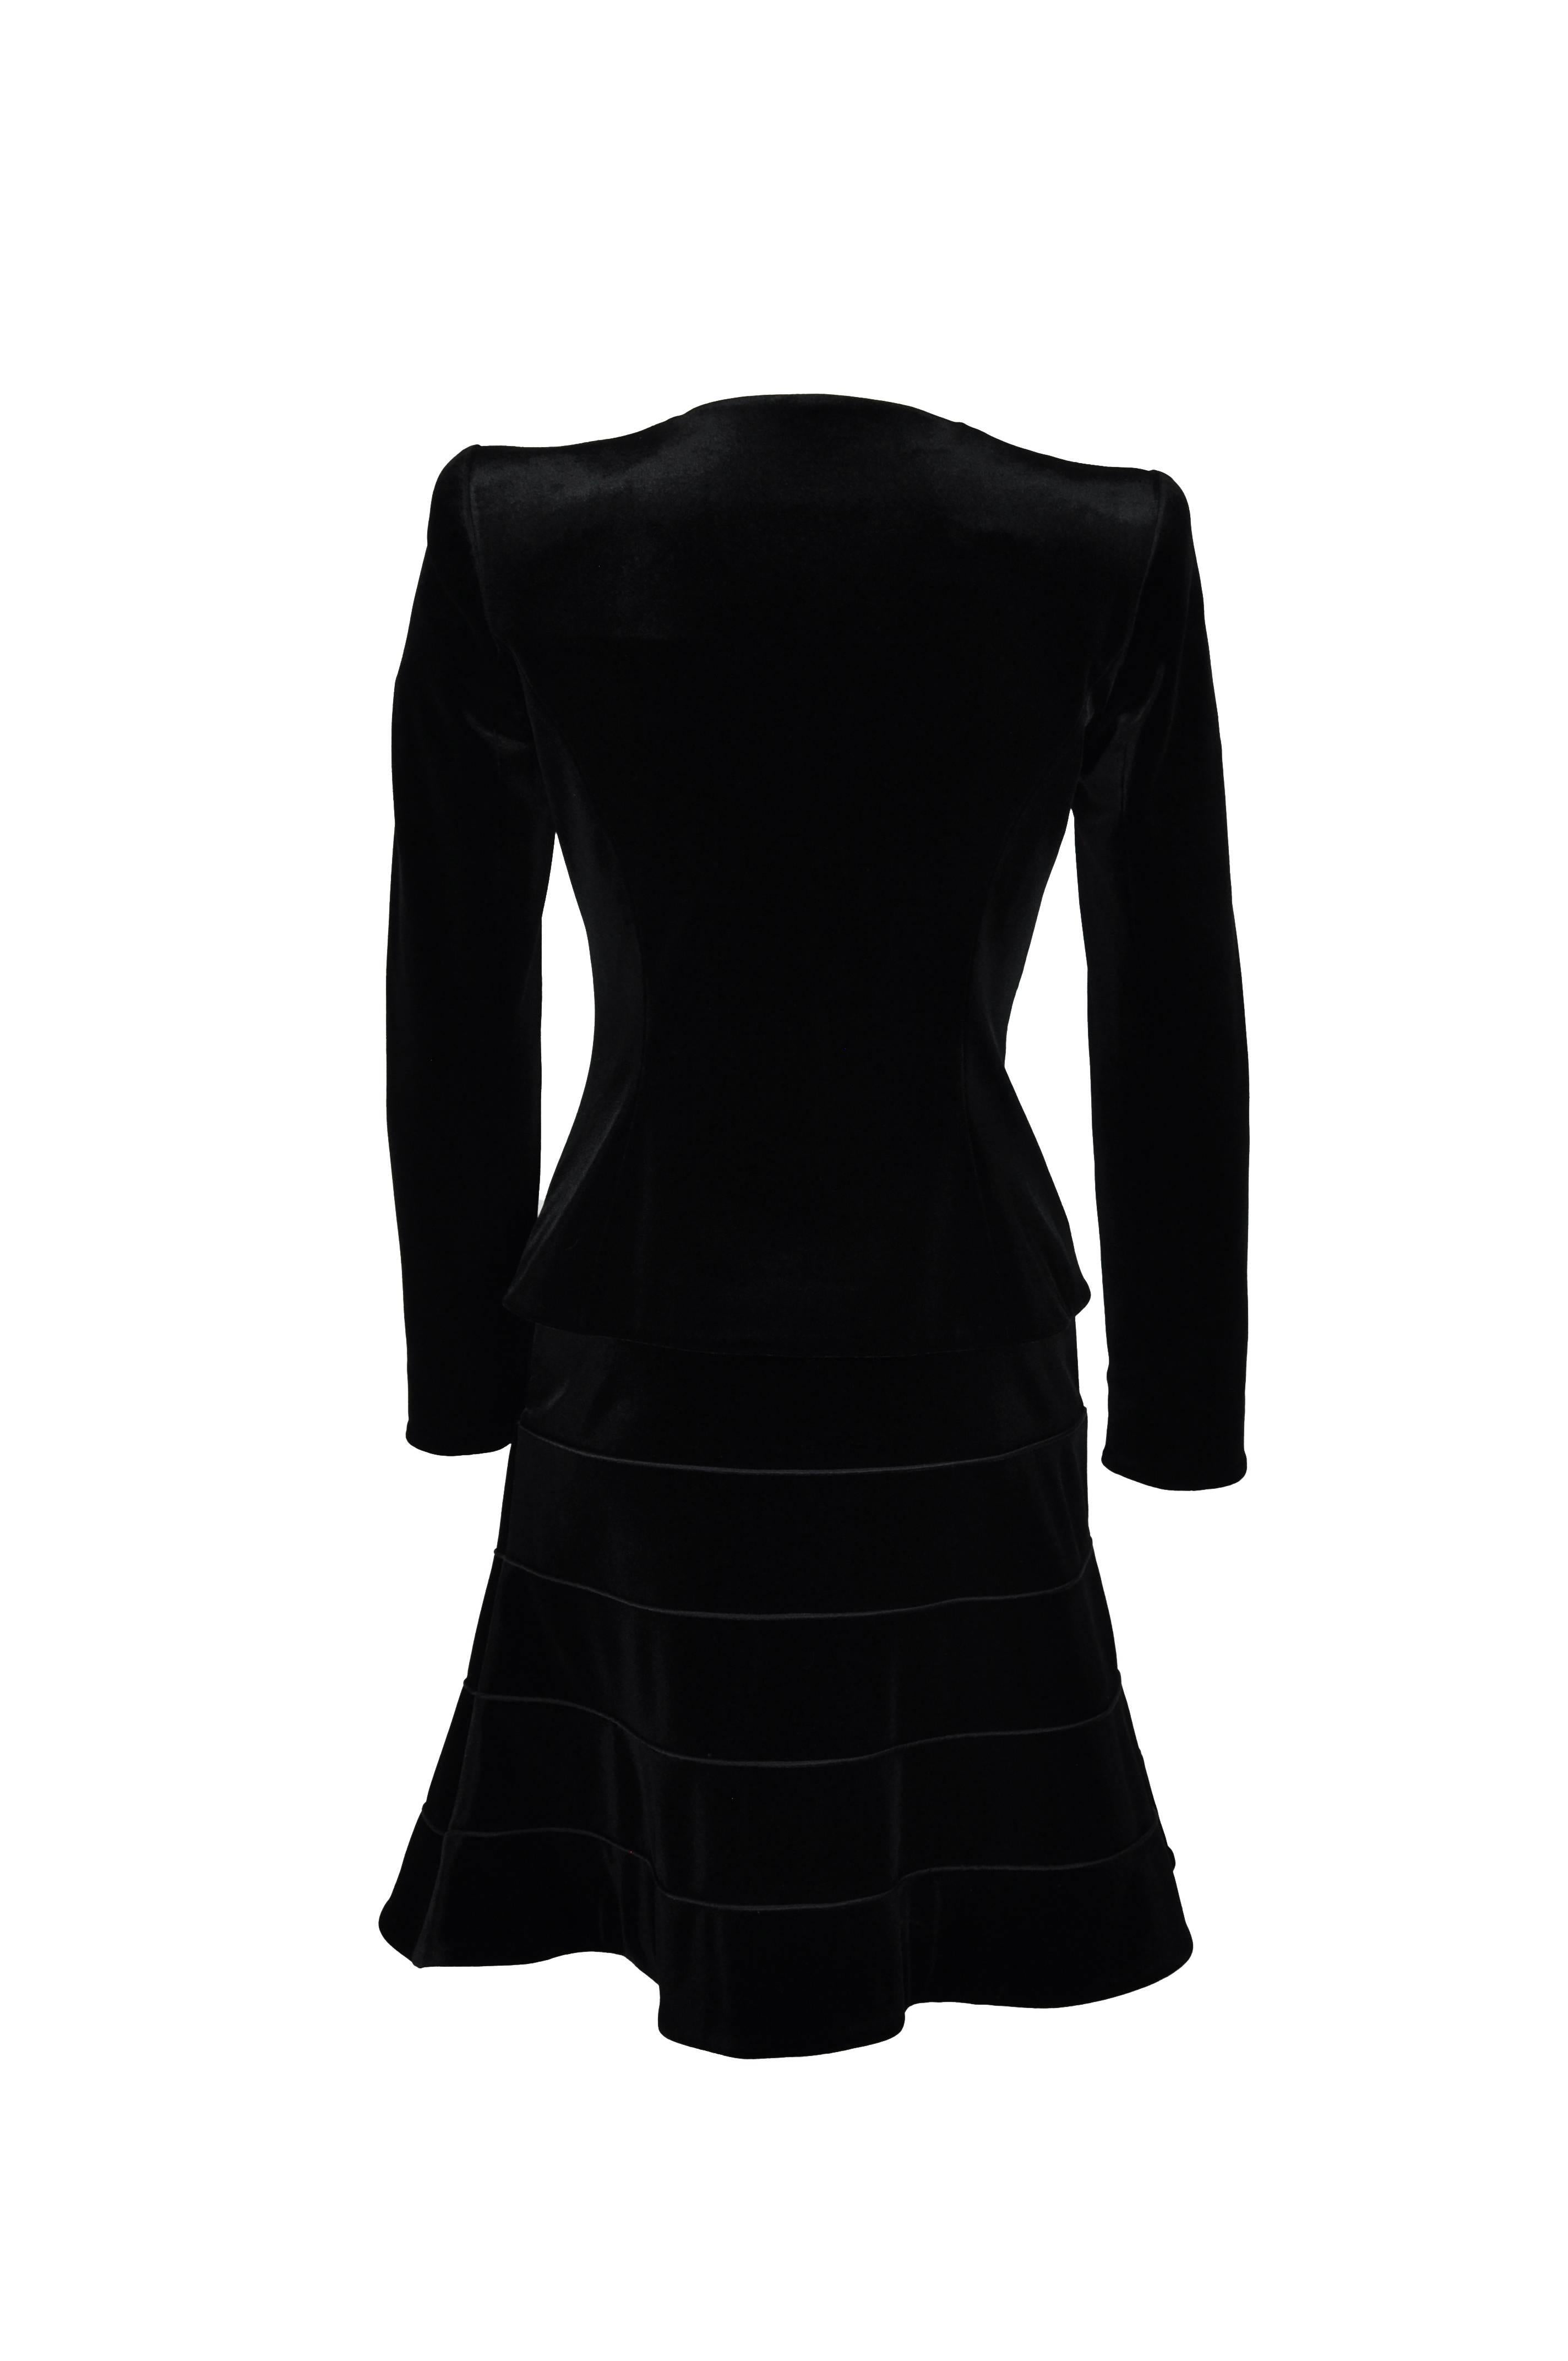 A timeless and elegant fitted black stretchy velvet jacket with A-line panel skirt.
The collarless jacket features a large black satin bow at front with two snaps and loop fastenings. The skirt has zip at side. Fully lined
 